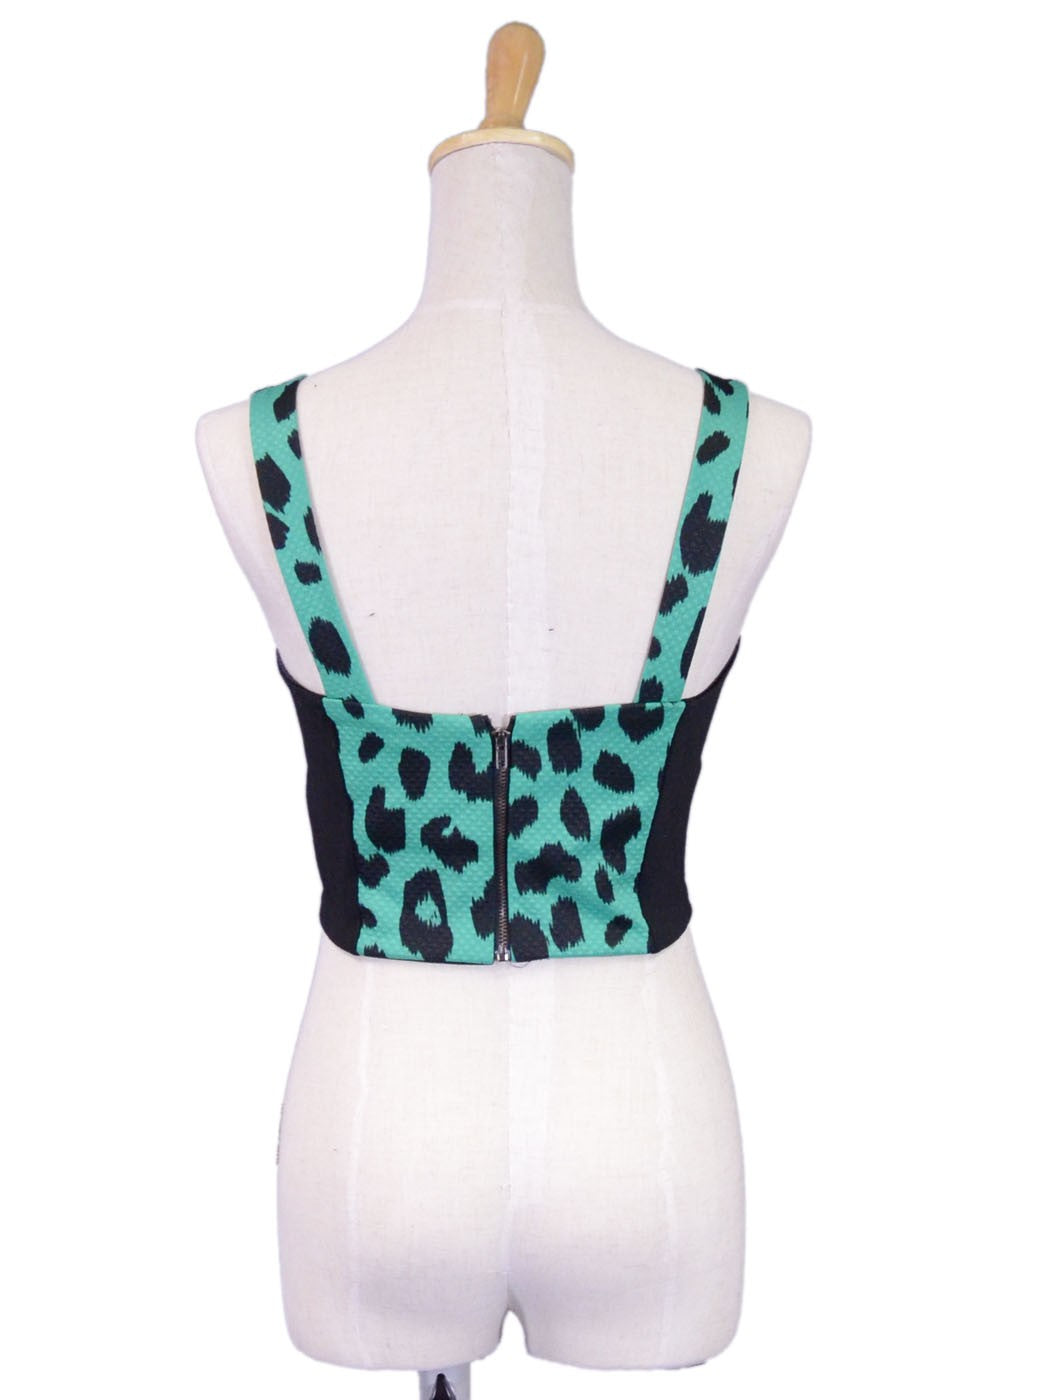 Lush Strapless Textured Leopard Print Cropped Bra Top With Zipper Closure - ALILANG.COM